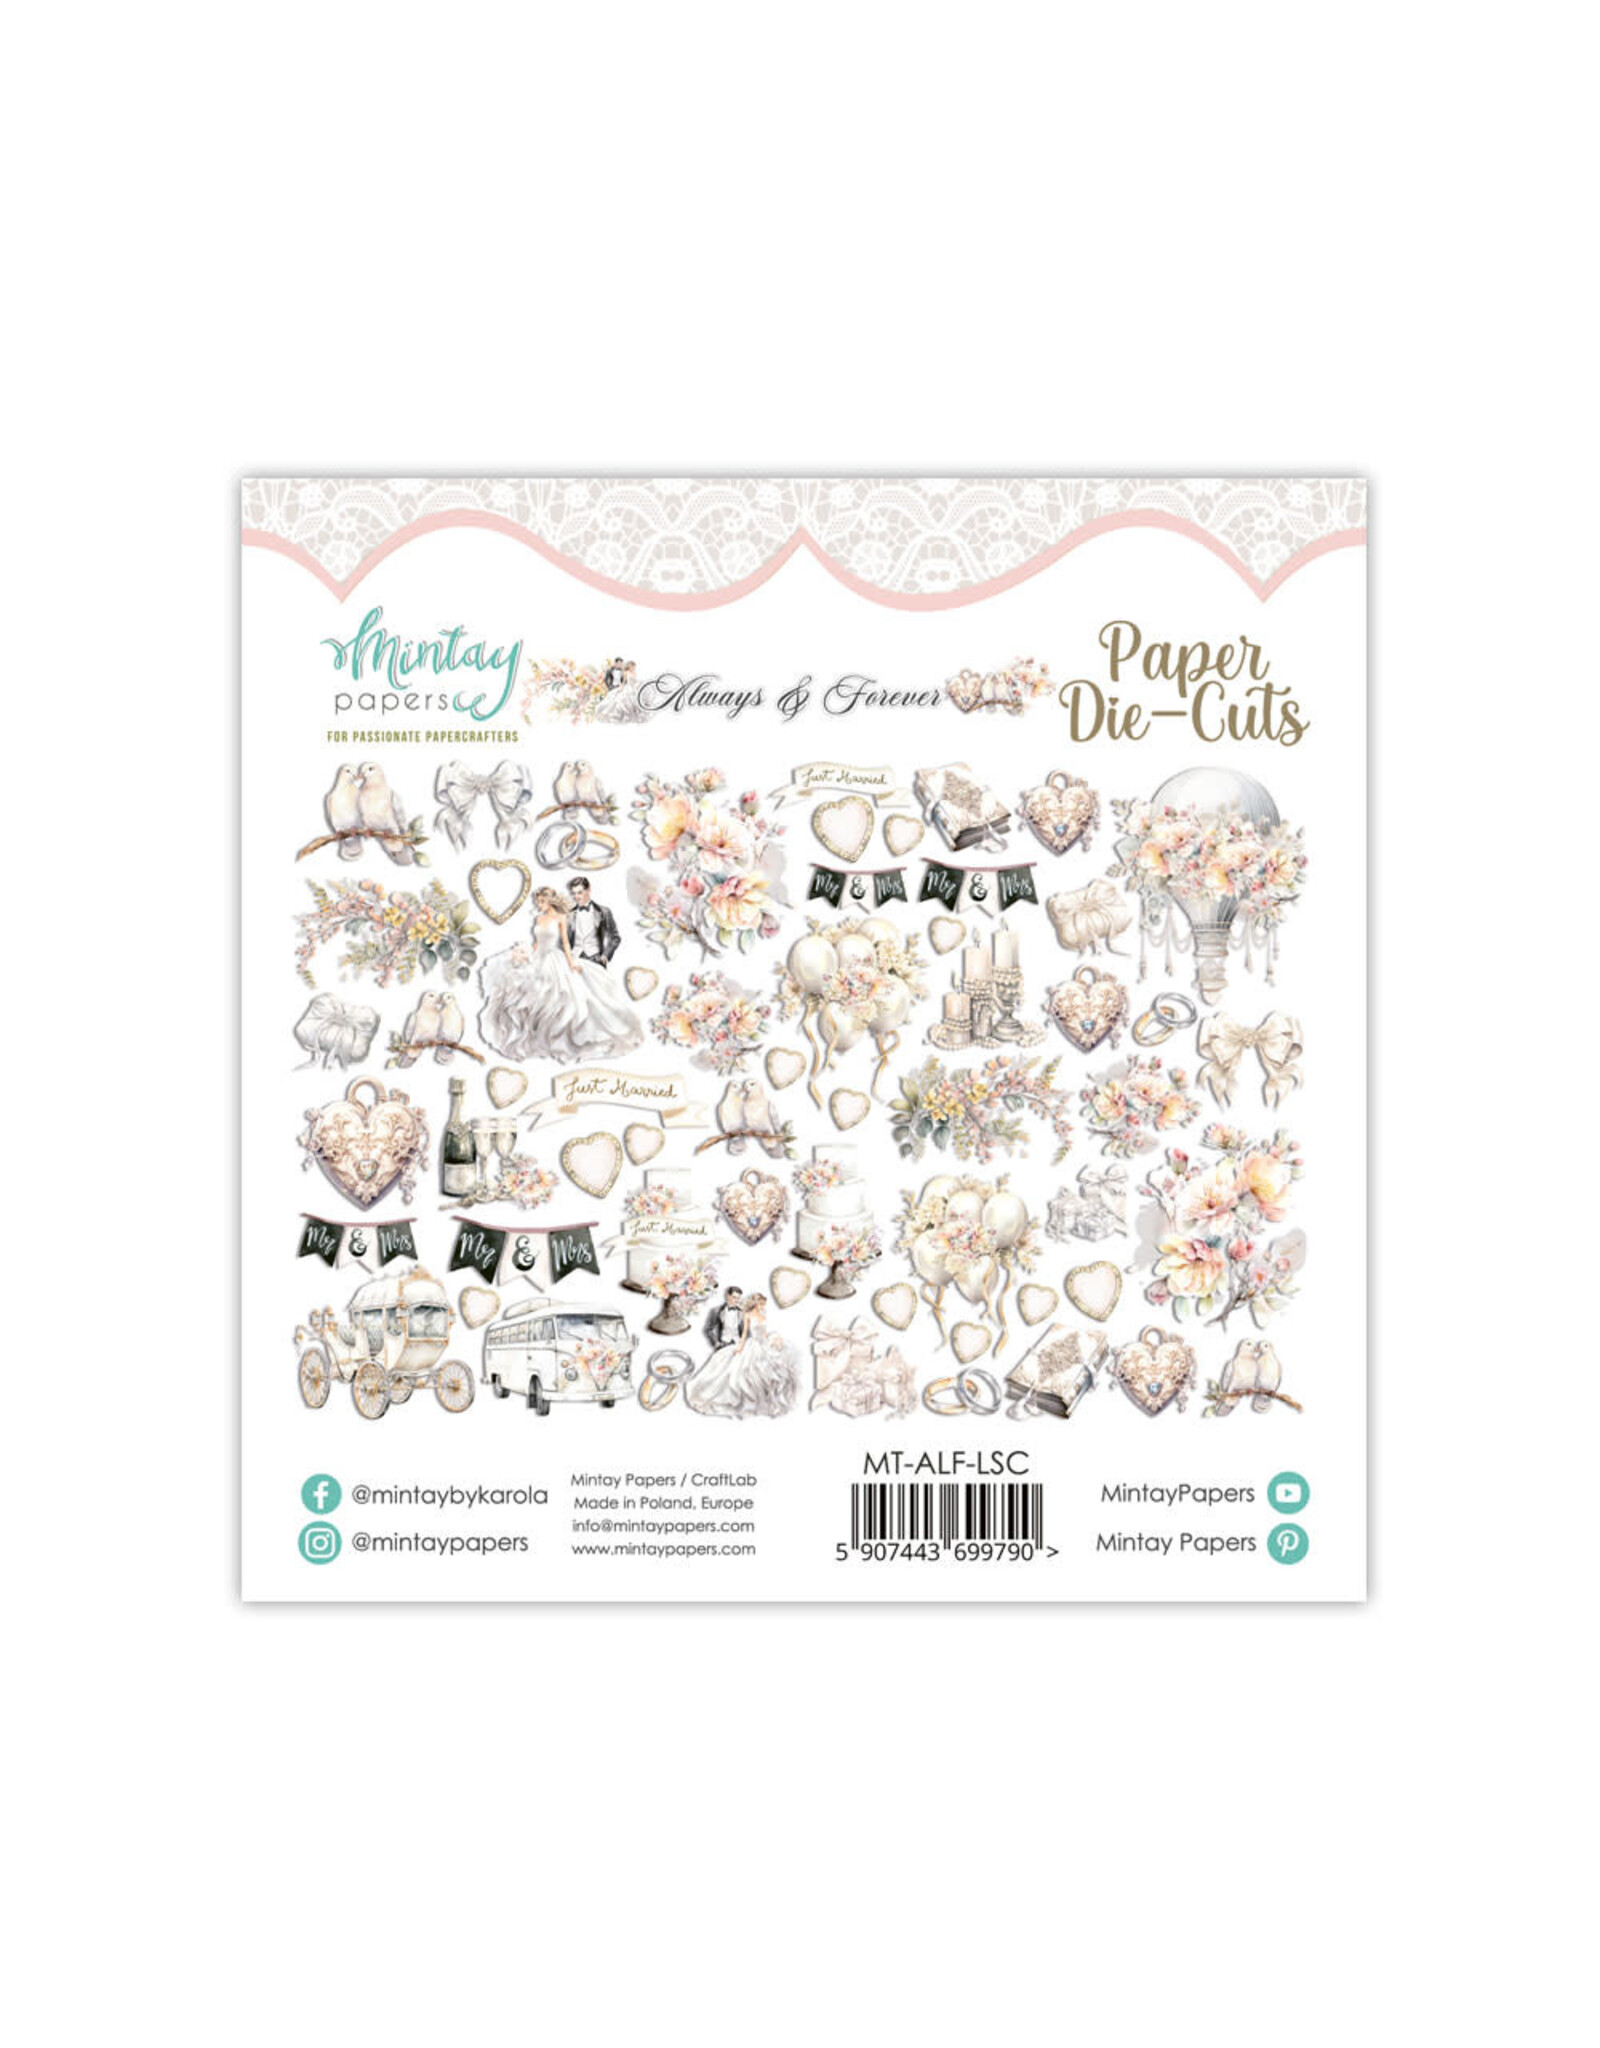 Mintay Papers Always & Forever - Paper Die-Cuts -  60 pcs